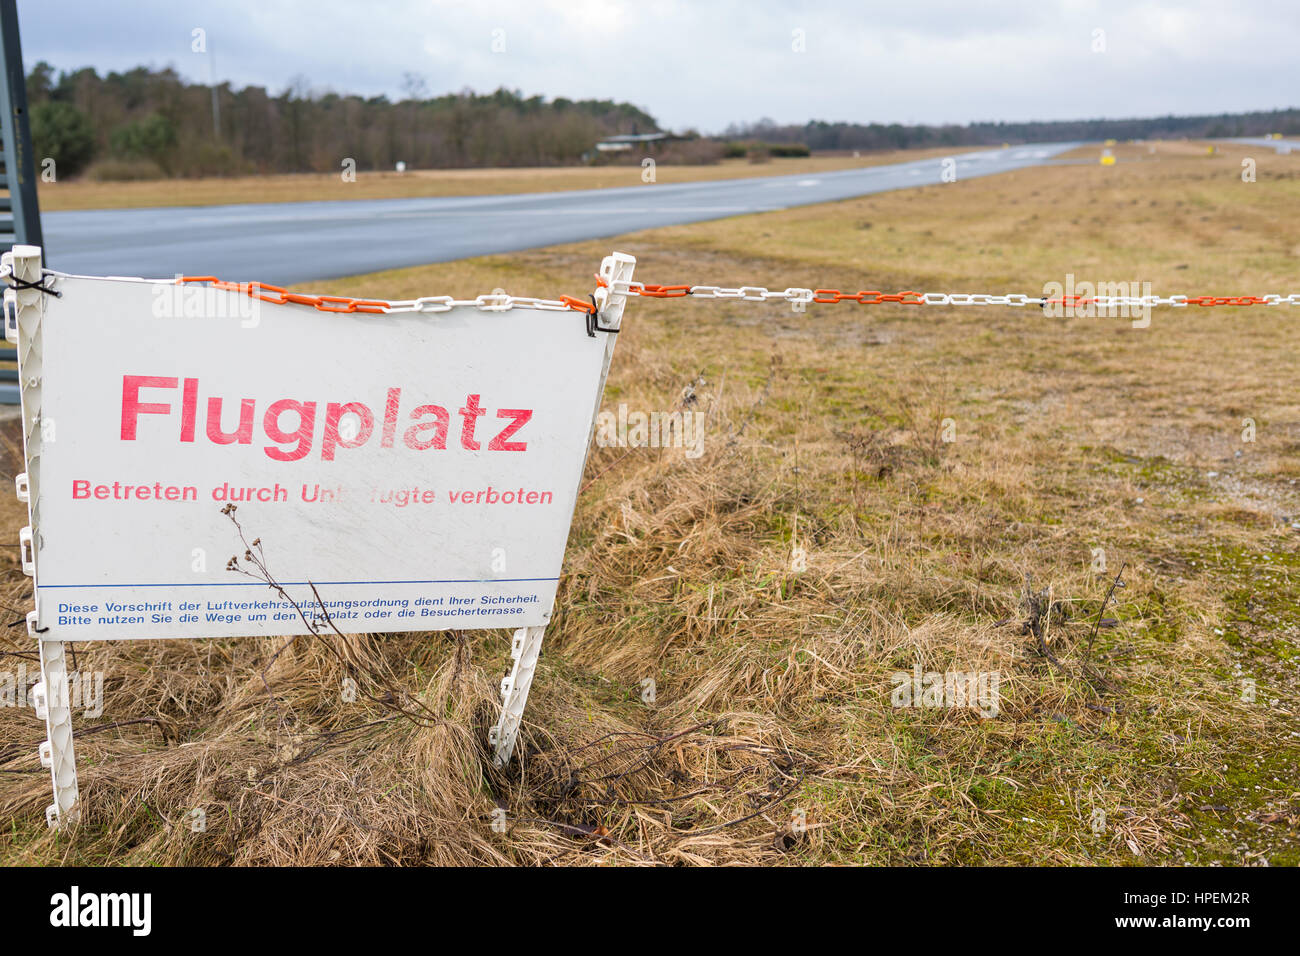 End of runway 29 at Bielefeld-Senne airport, Germany with Flugplatz sign Stock Photo